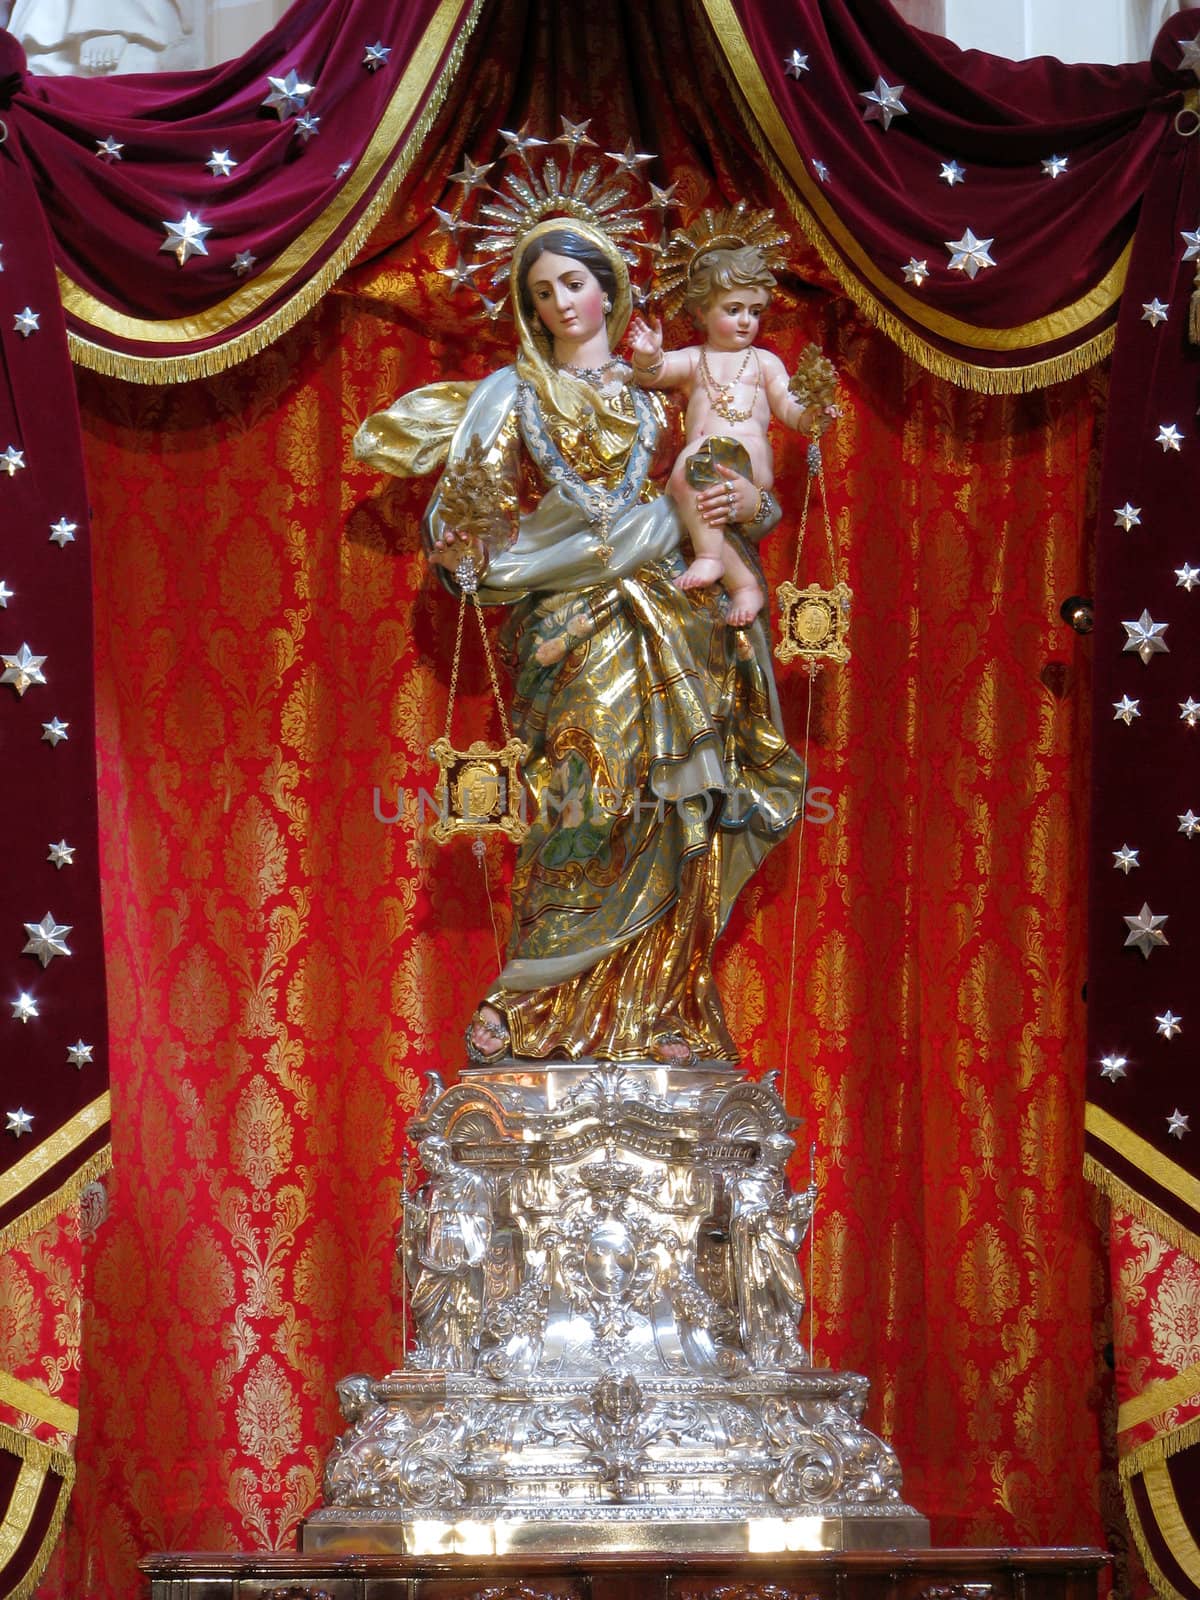 The statue of Our Lady of Mount Carmel in Valletta, Malta.